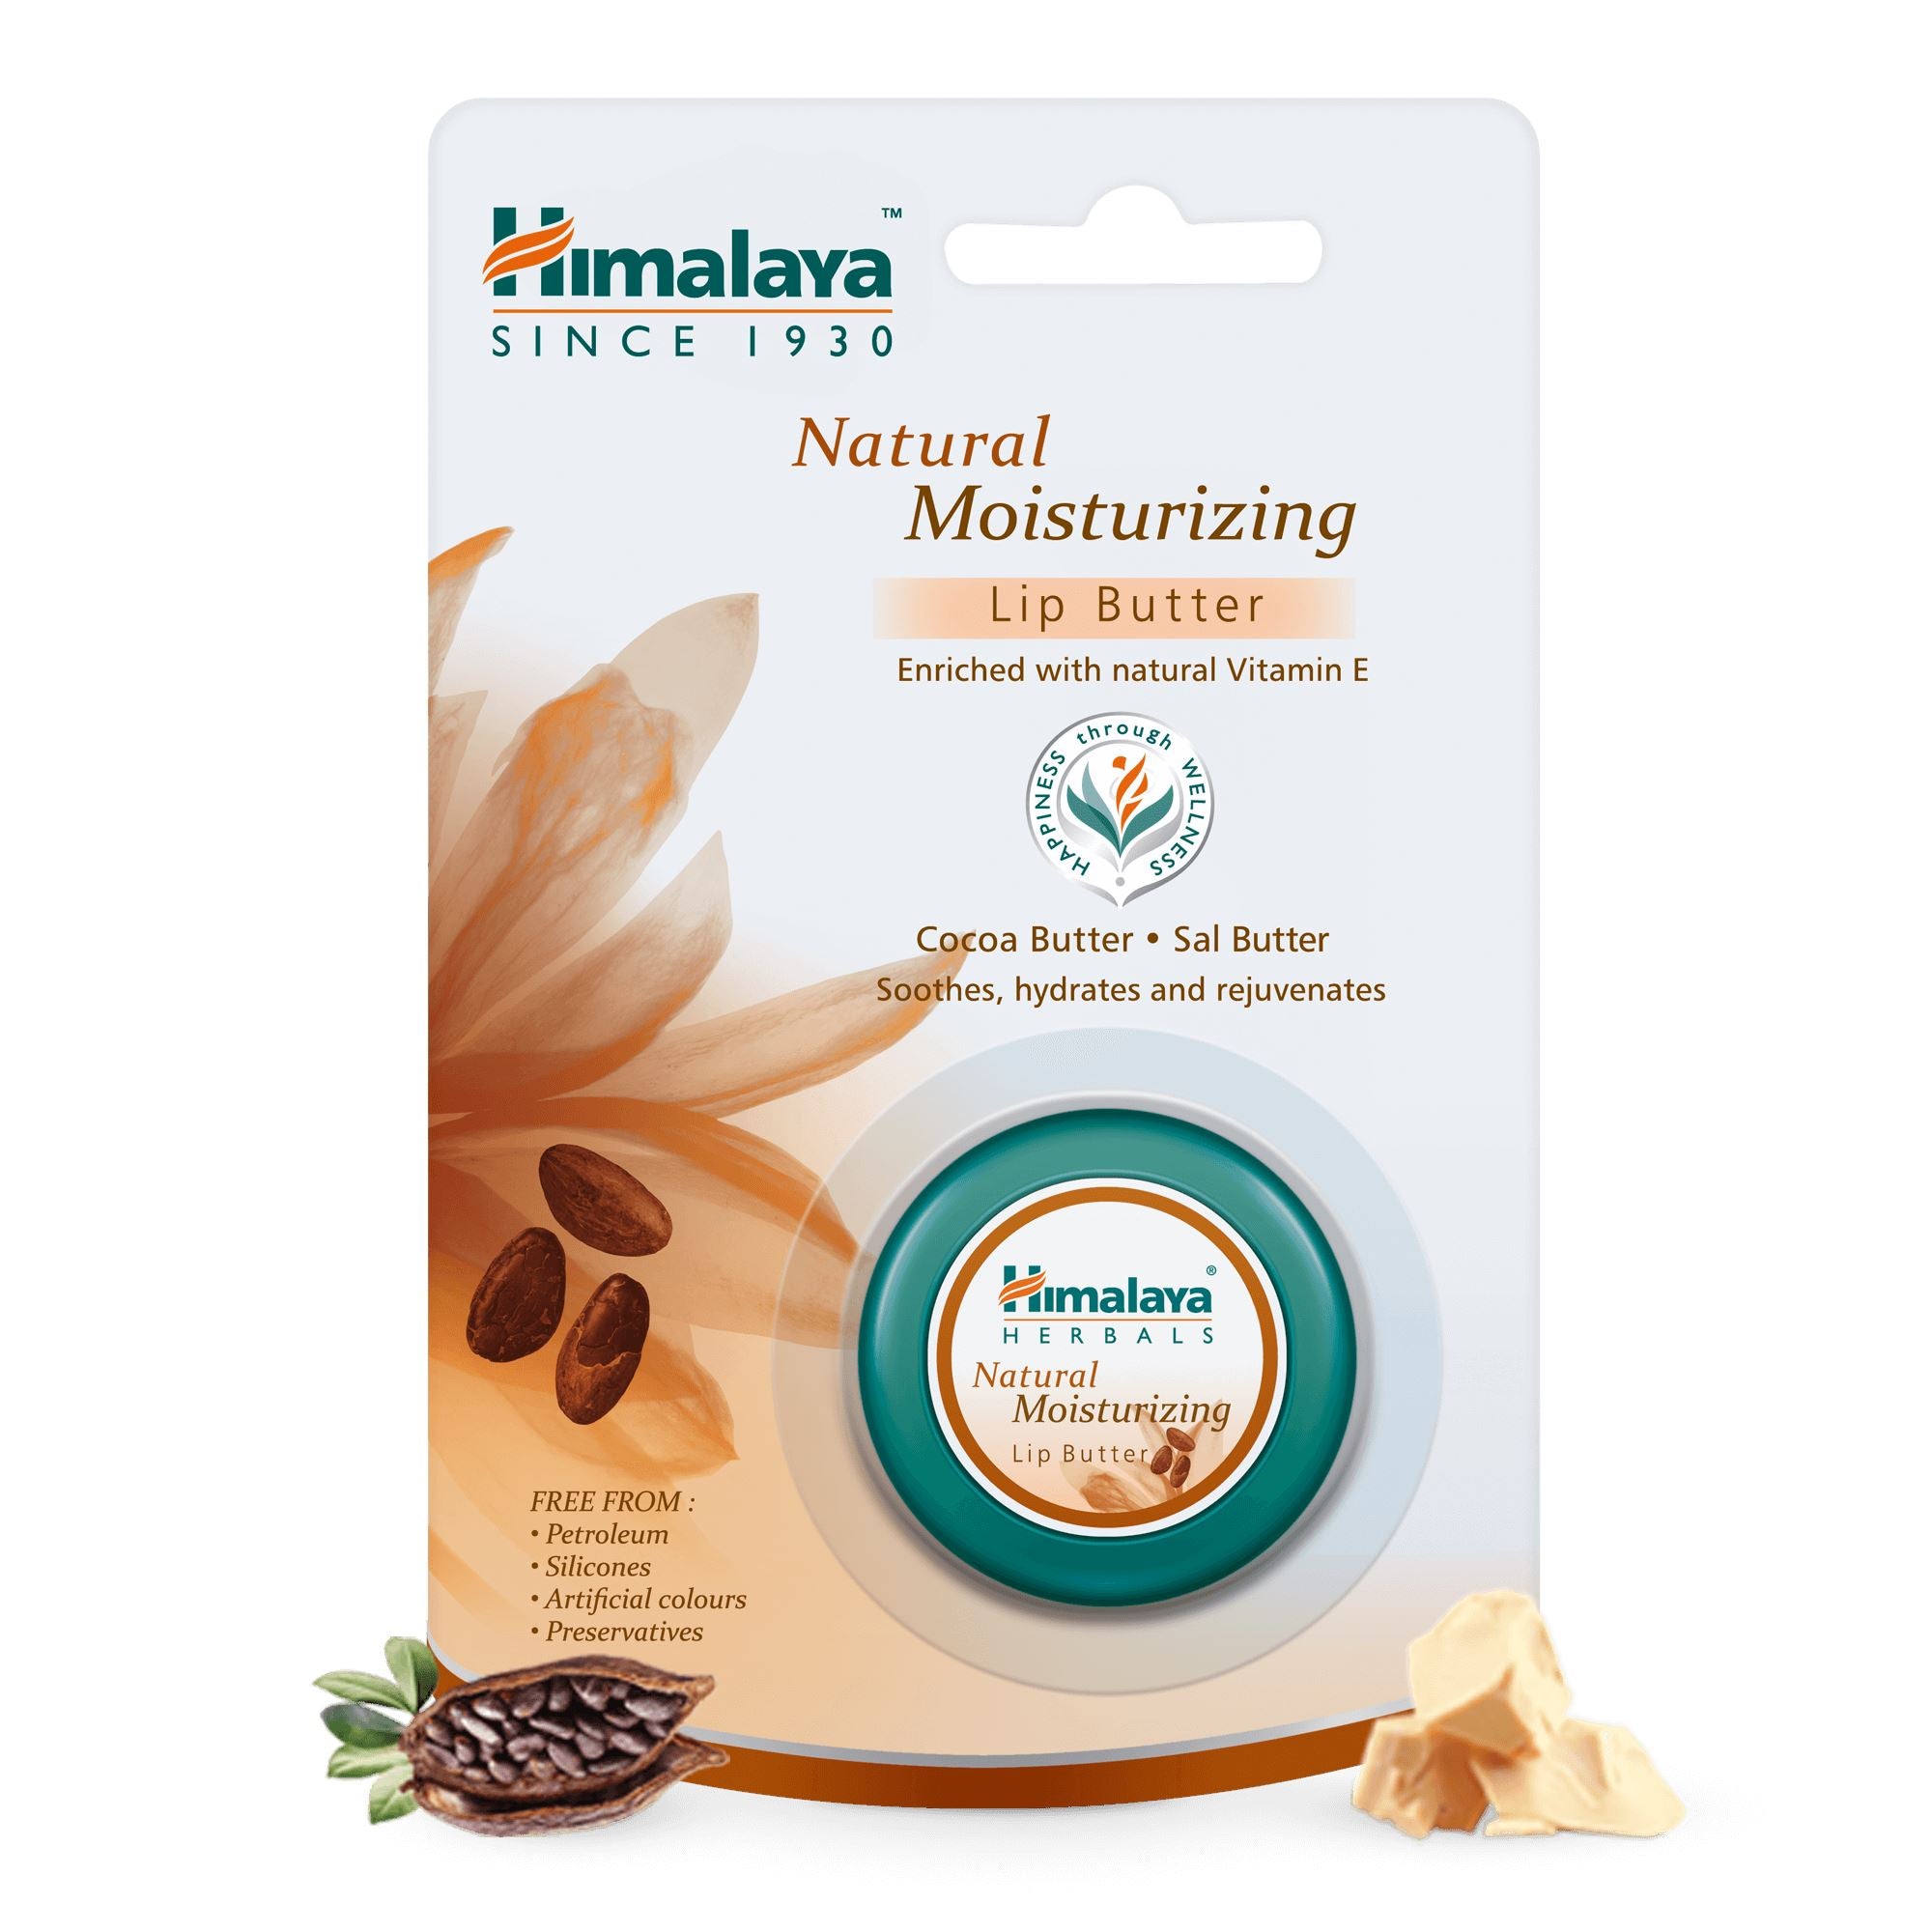 Himalaya Natural Moisturizing Lip Butter - Soothes, hydrates and rejuvenates